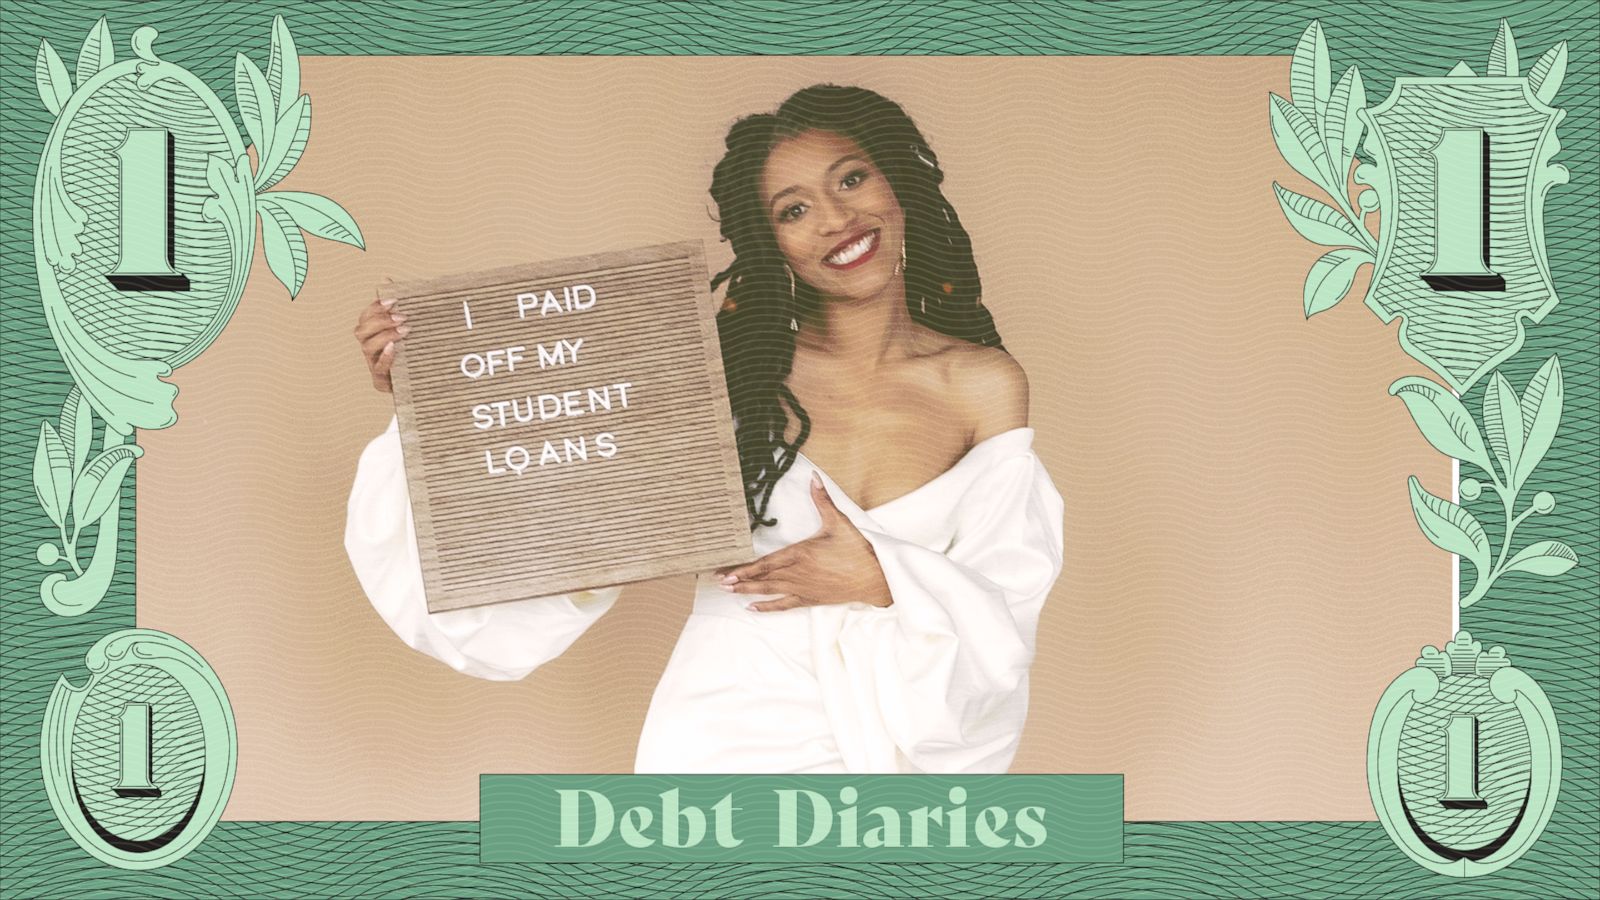 PHOTO: Dominique Jackson, 27, paid off $30,000 in student loan debt in December 2020. To celebrate, she had a photo shoot.